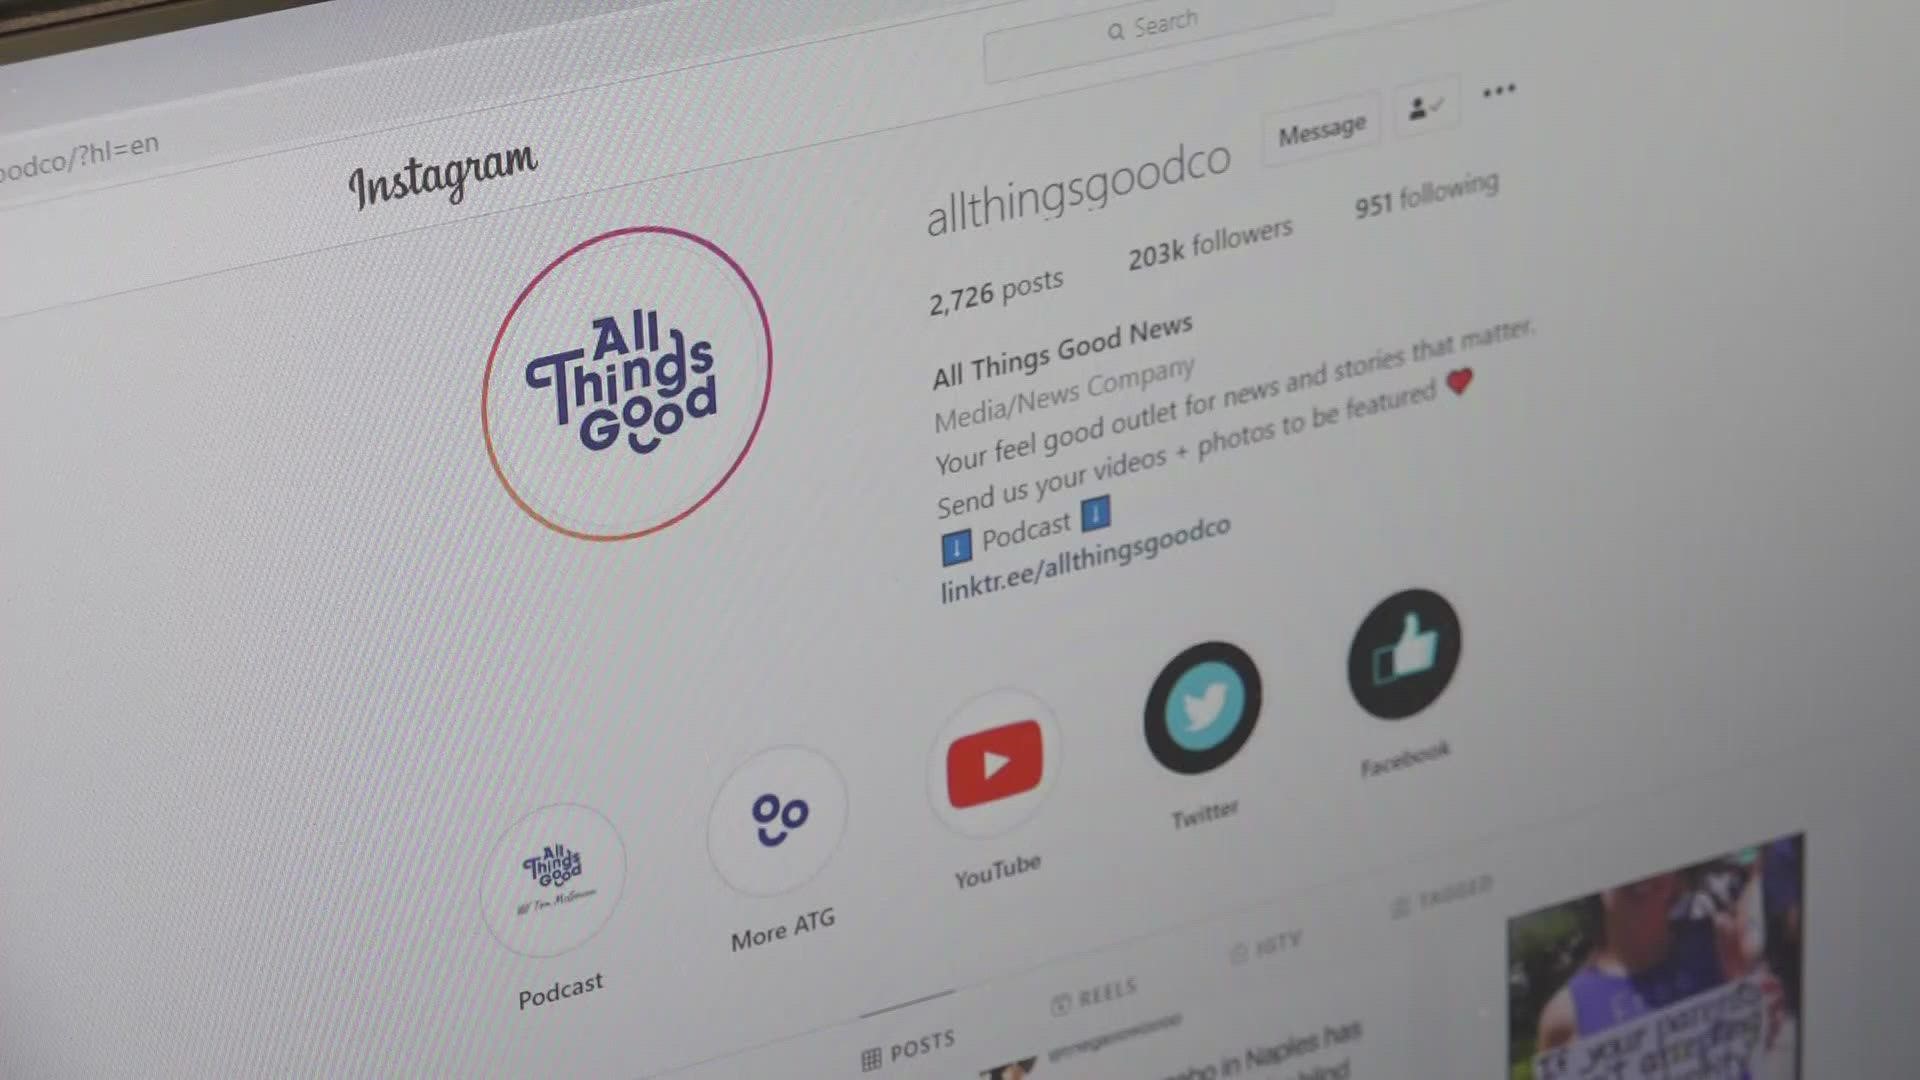 A Maine man is behind a growing social media business that spreads only good news called All Things Good.